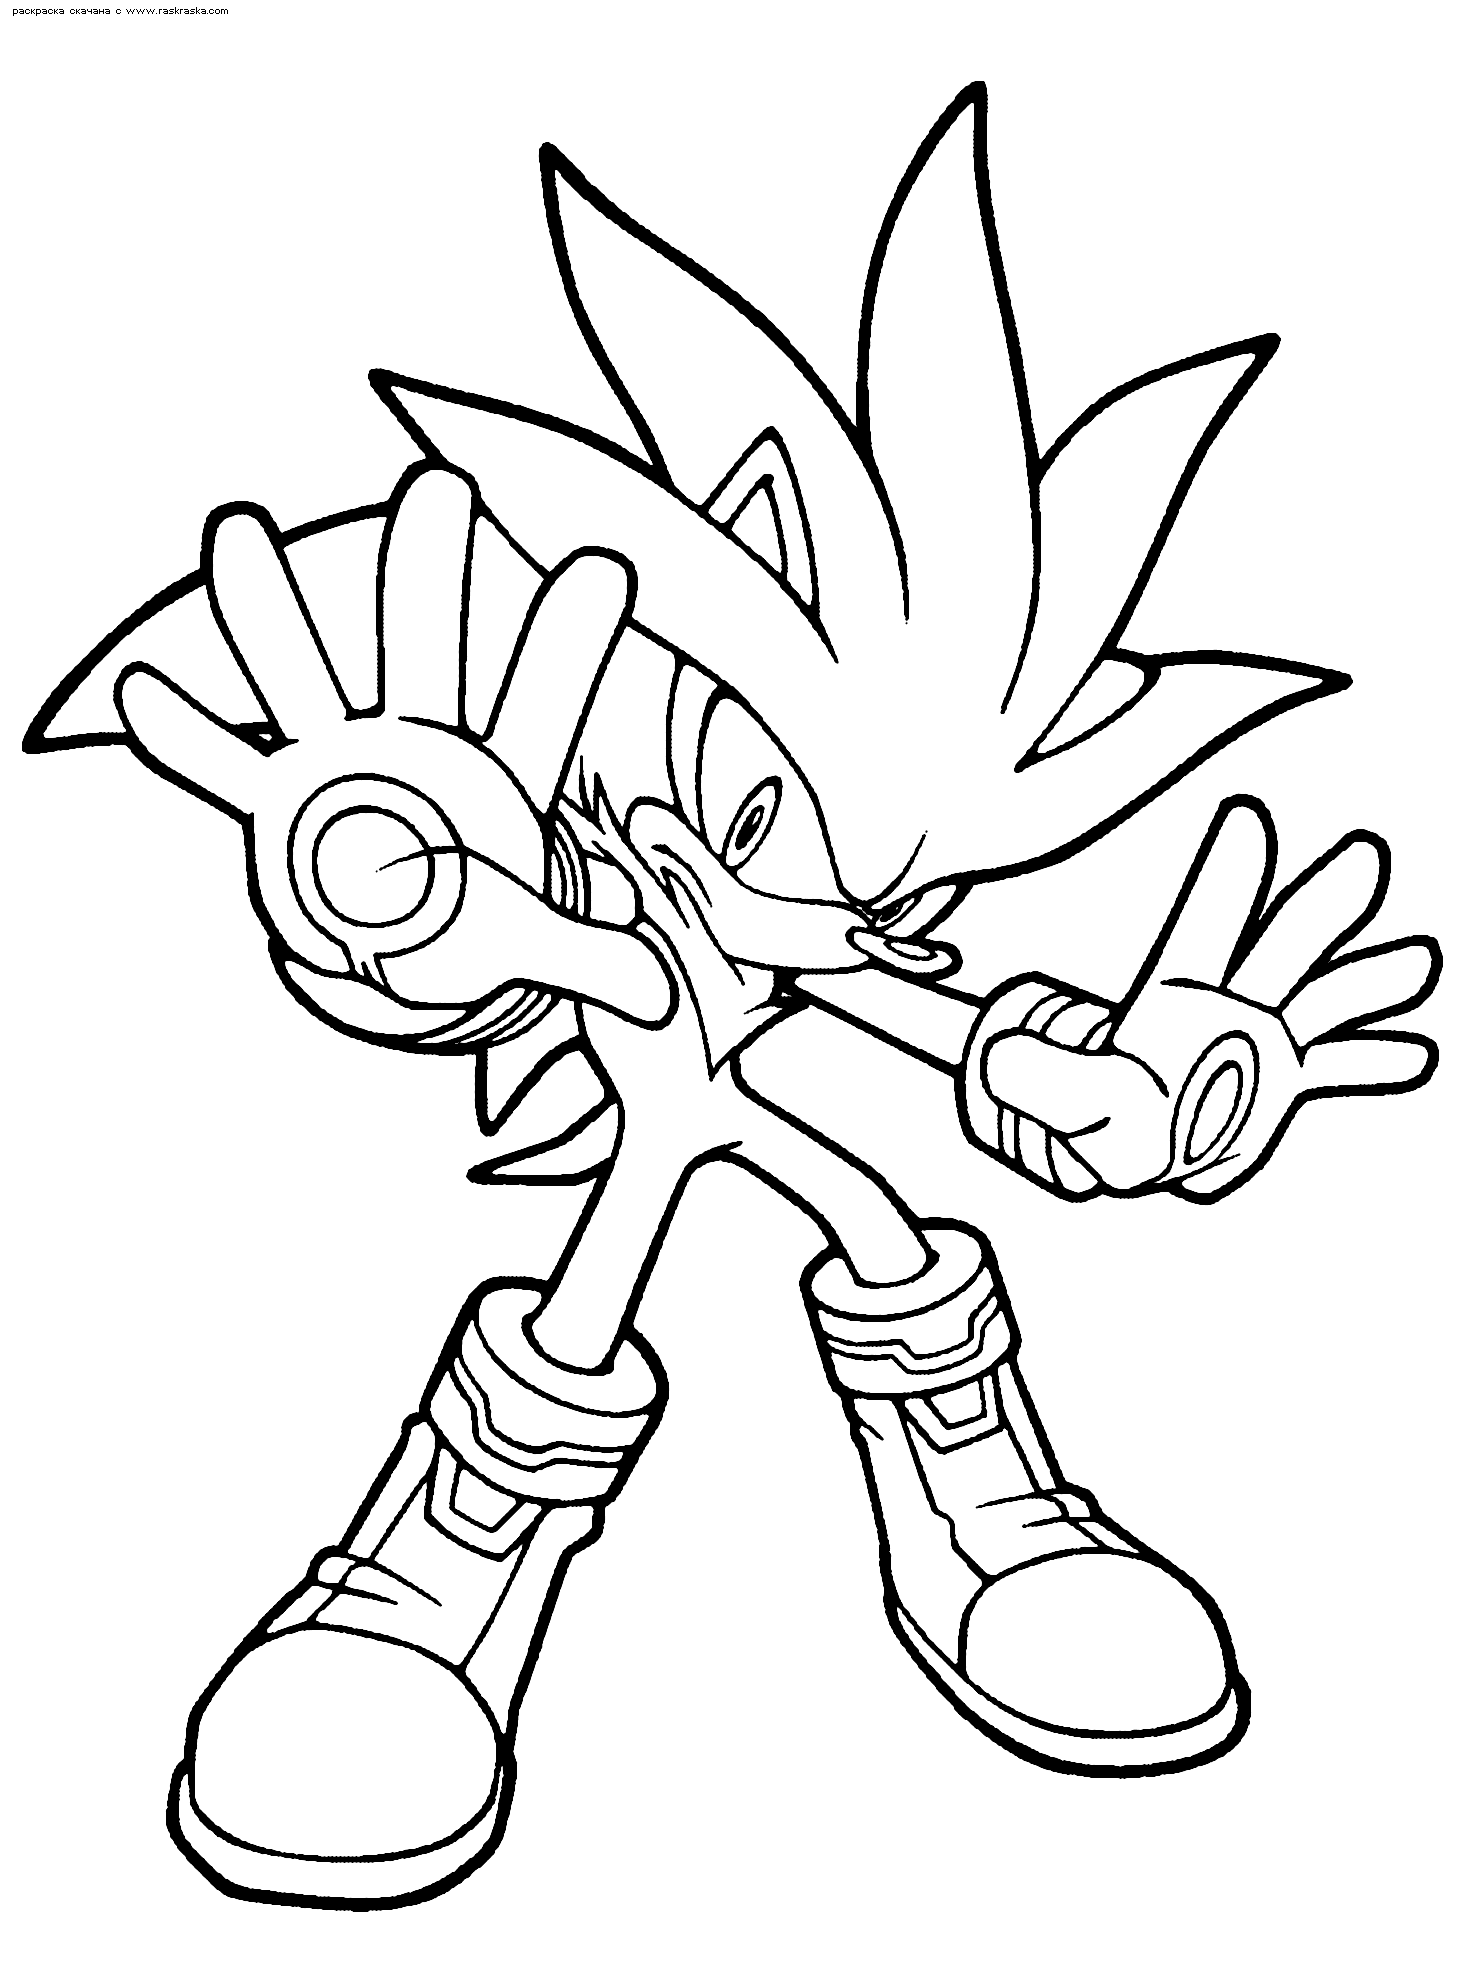 Super Sonic And Super Shadow And Super Silver Coloring Pages - Coloring